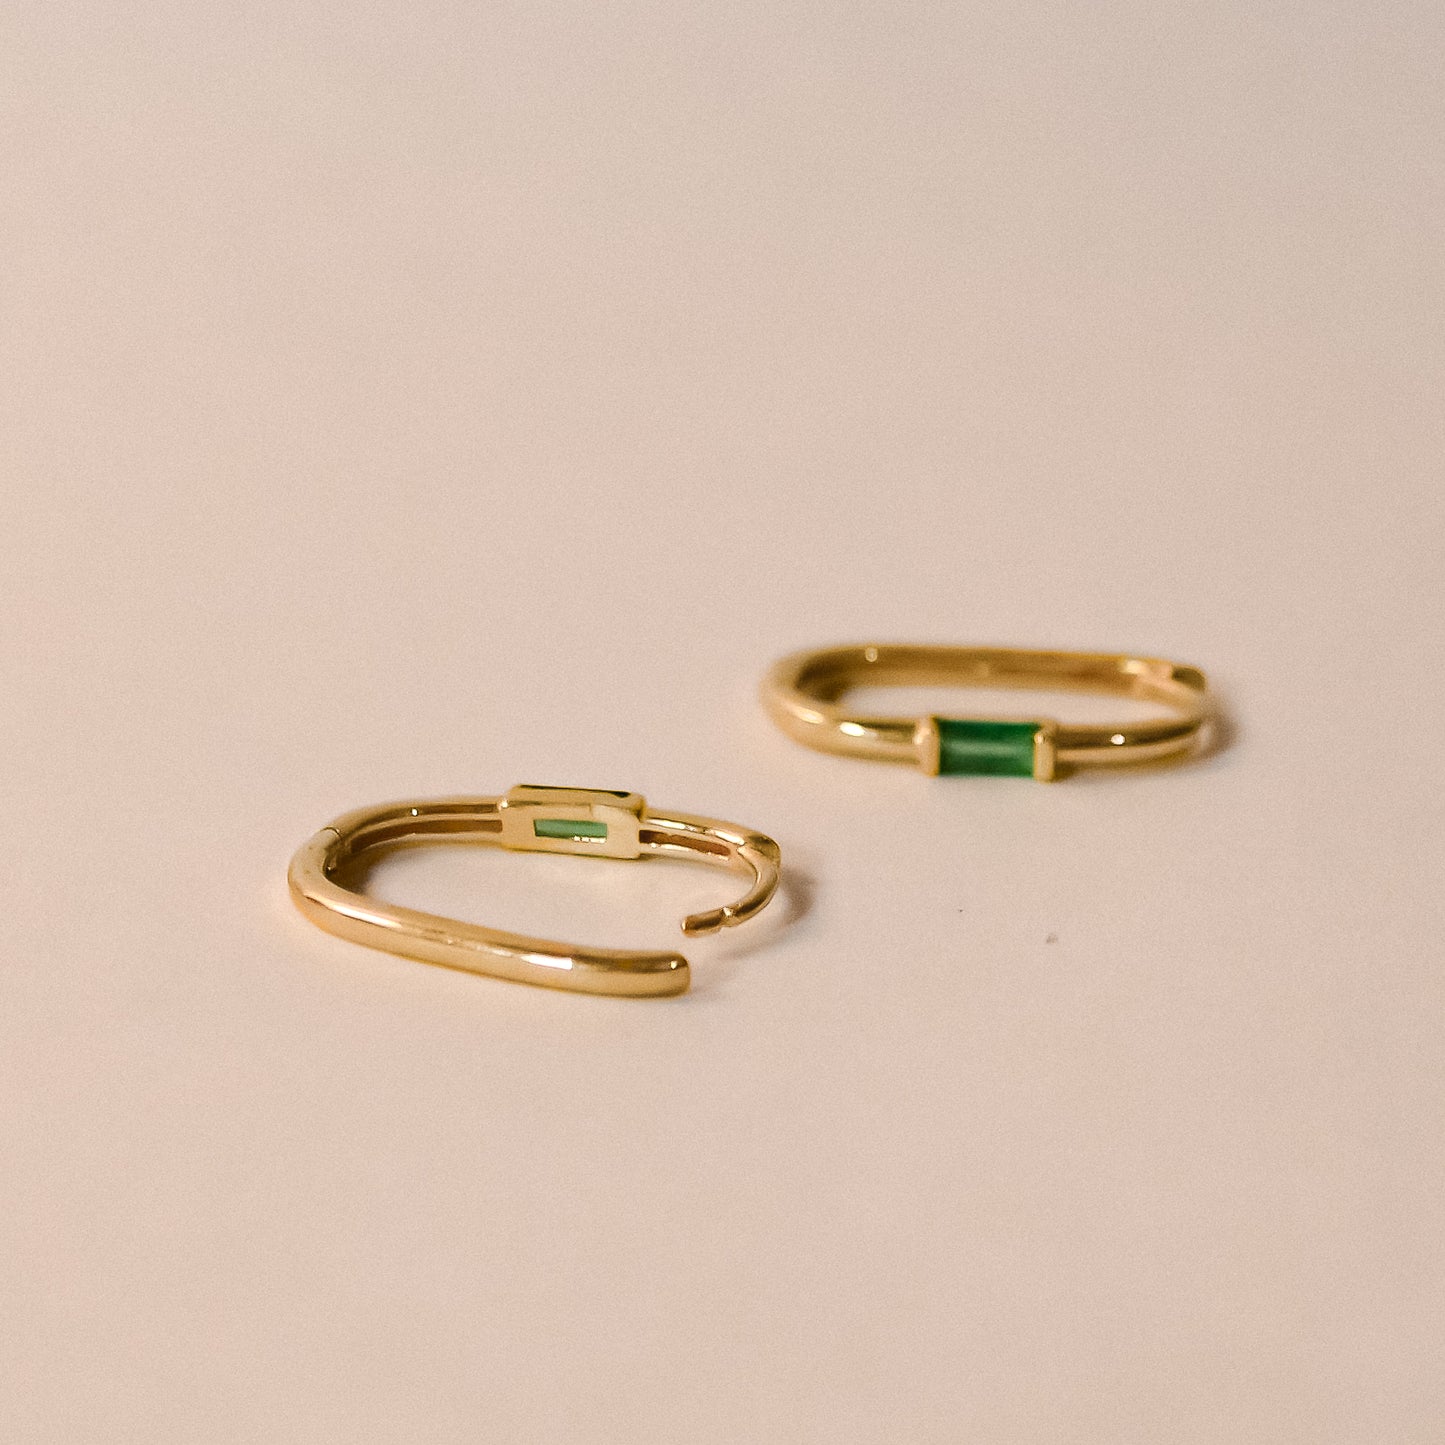 Festiva 9K Solid Yellow Gold Paperclip Hoops in Emerald